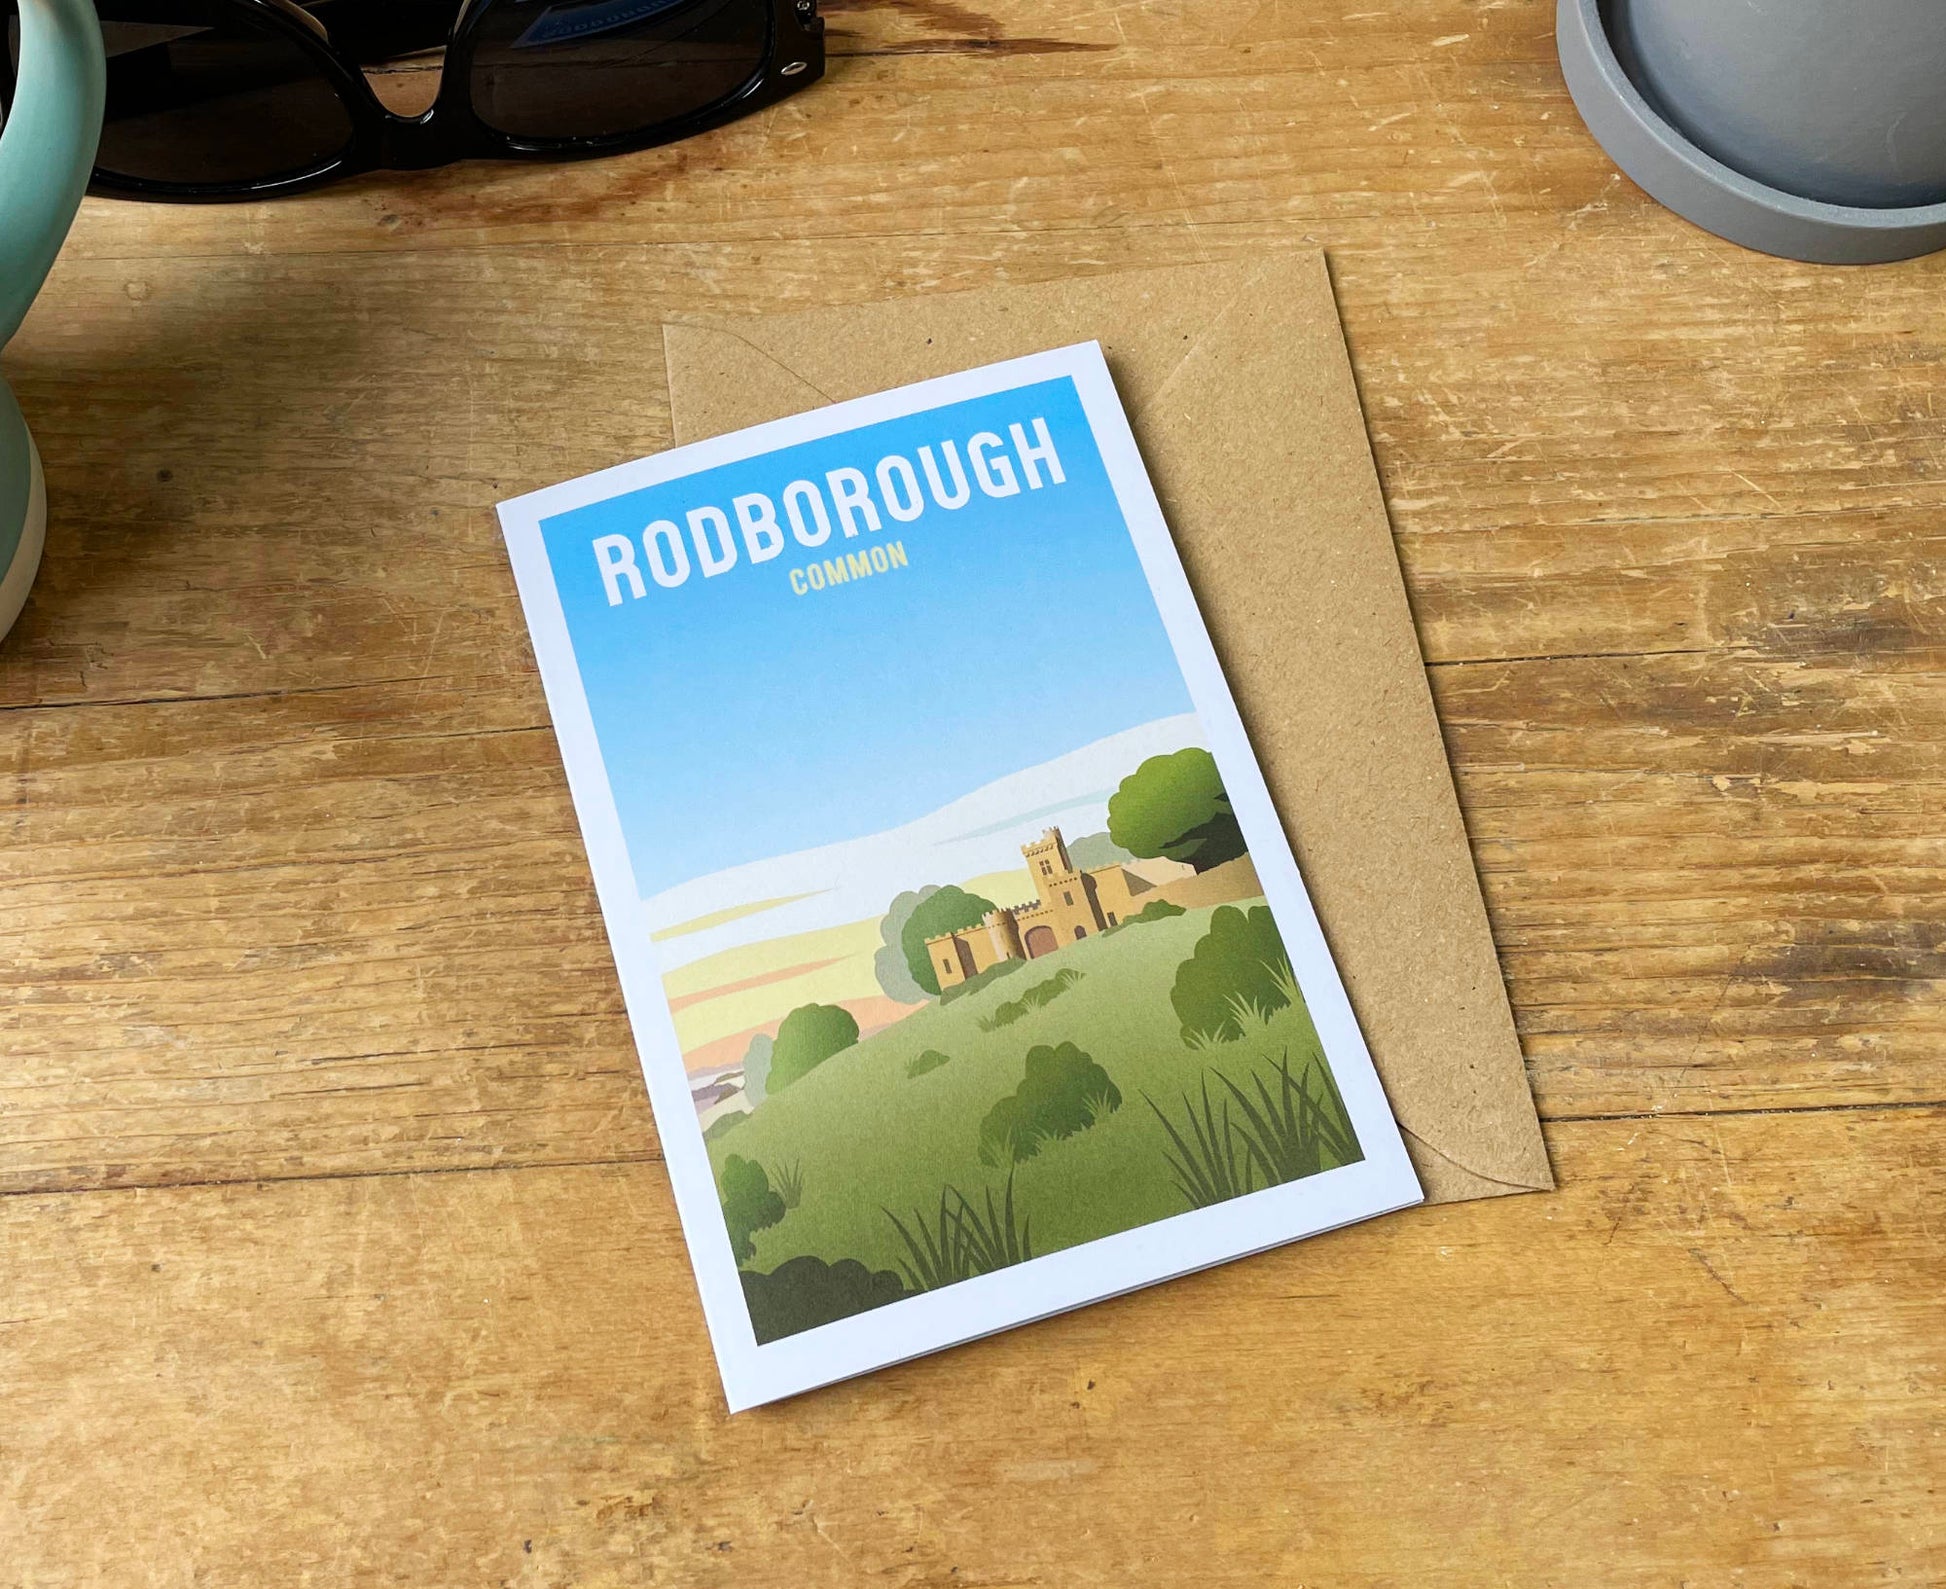 Rodborough Common Greeting Card on table with envelope